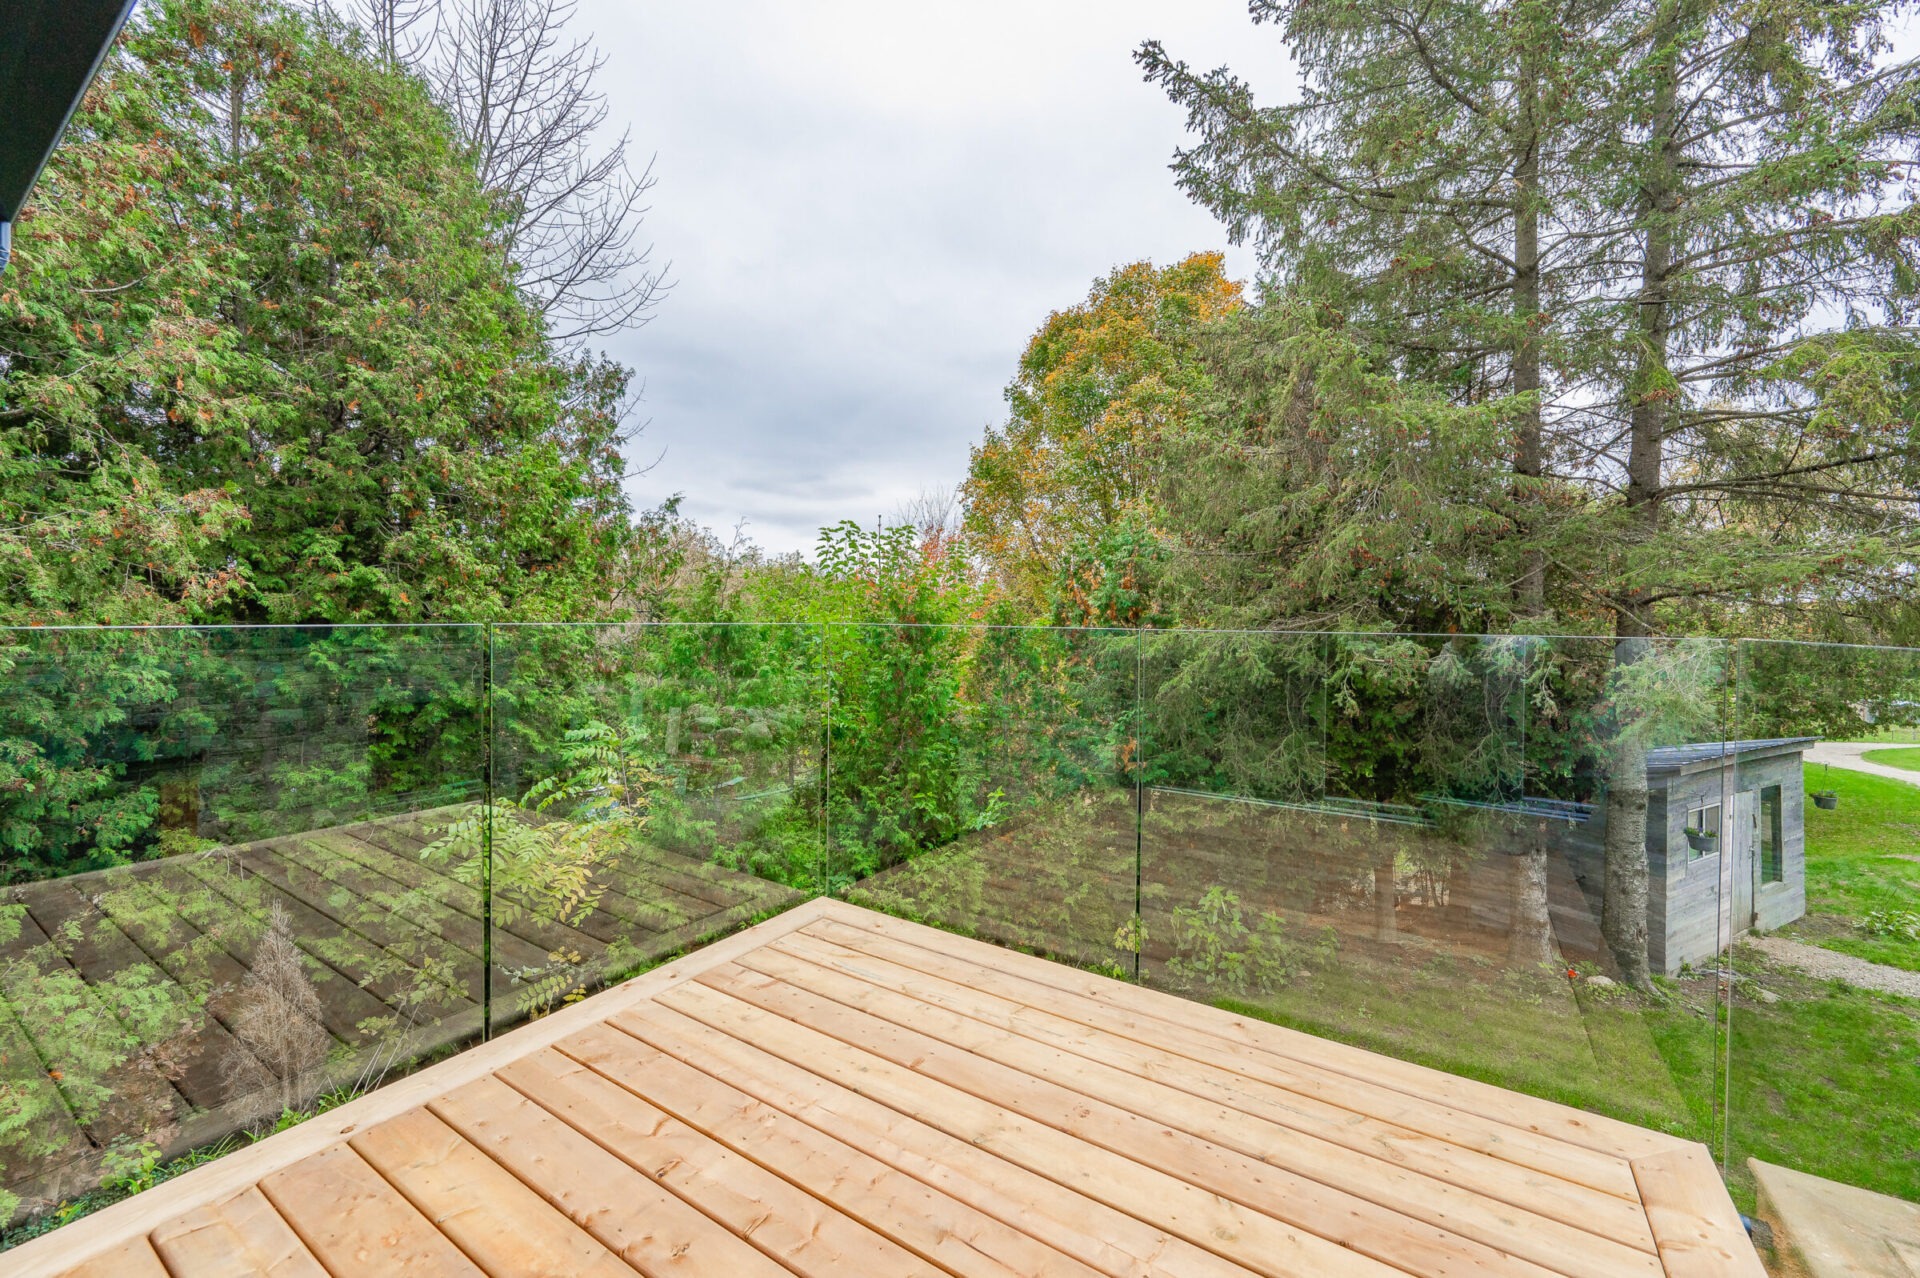 A spacious wooden deck with transparent glass balustrades overlooks a lush backyard with trees and a small garden shed, under a cloudy sky.